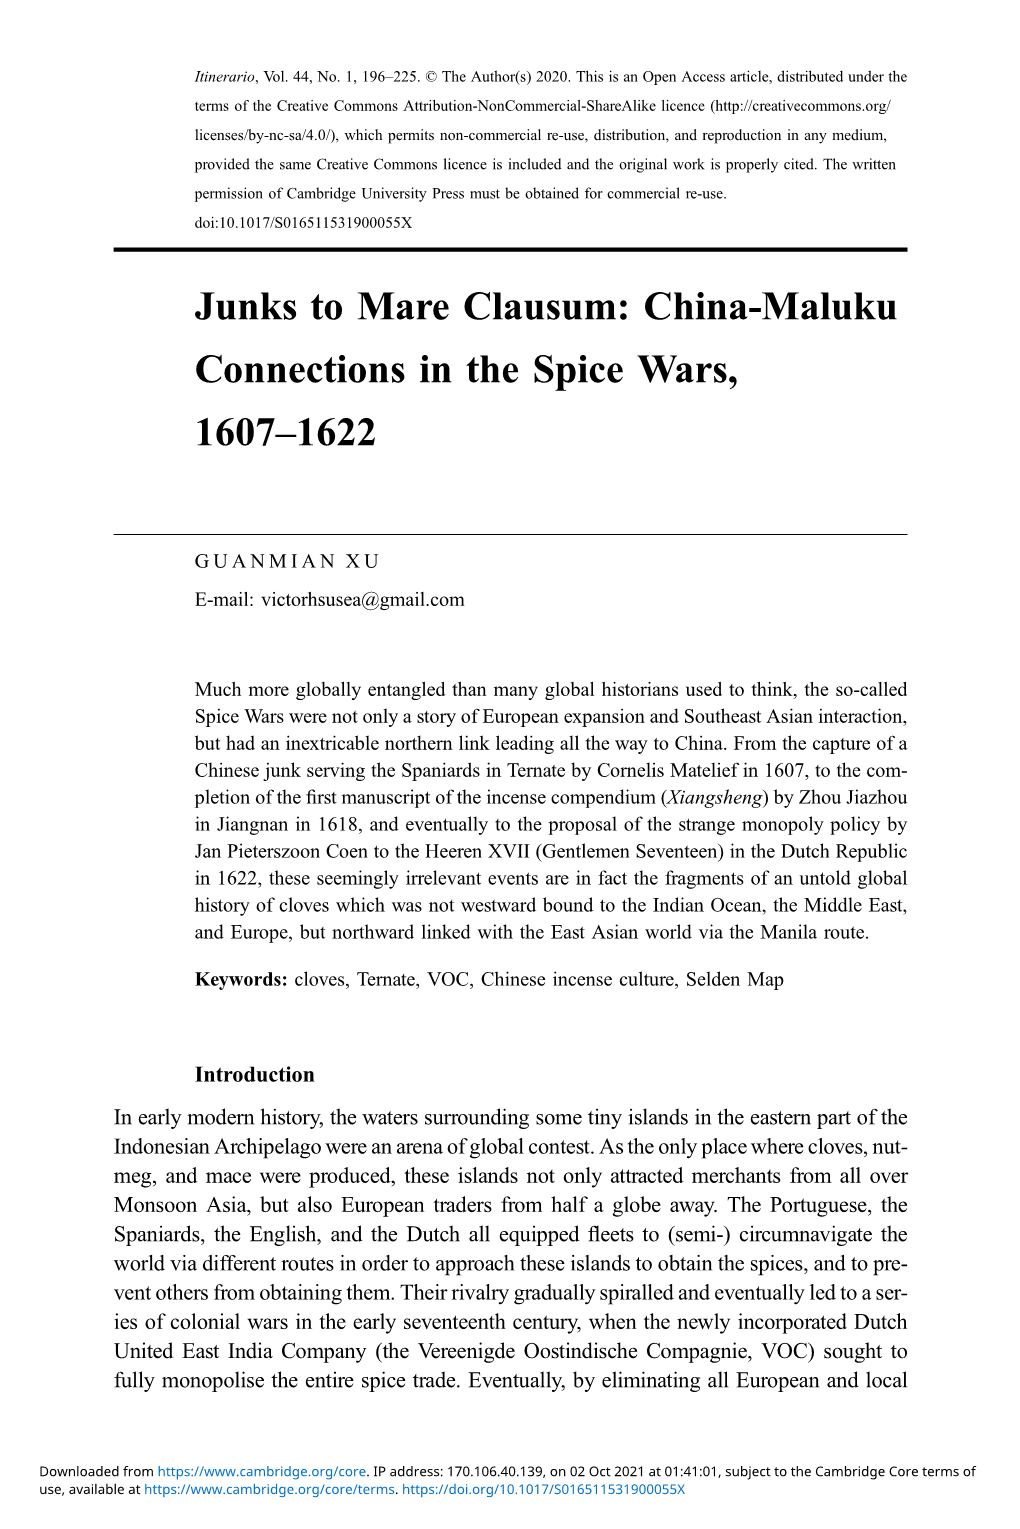 China-Maluku Connections in the Spice Wars, 1607–1622